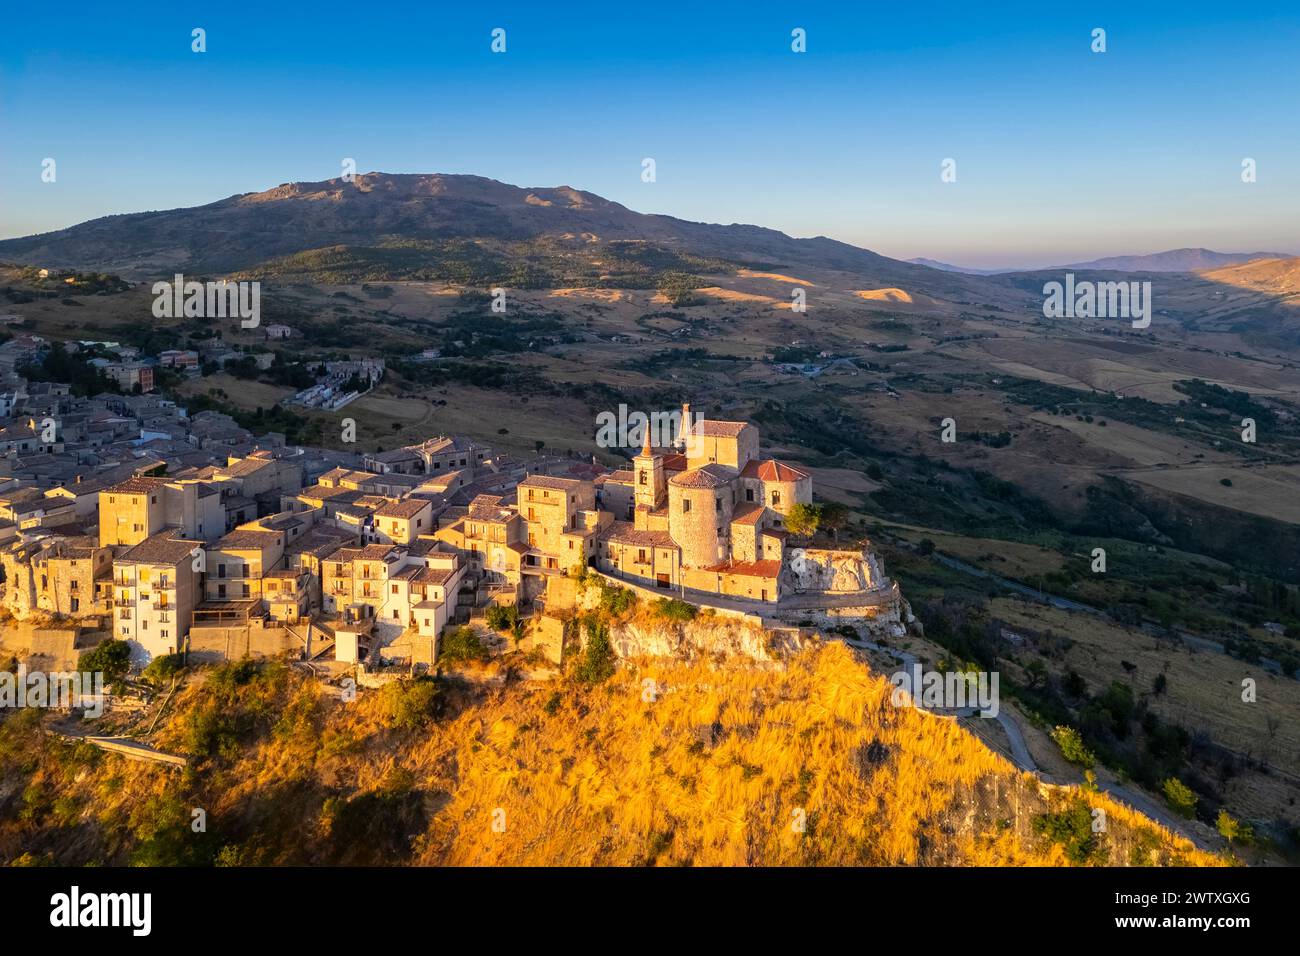 Aerial view of the ancient town of Petralia Soprana, built on a cliff, at sunset. Palermo district, Sicily, Italy. Stock Photo